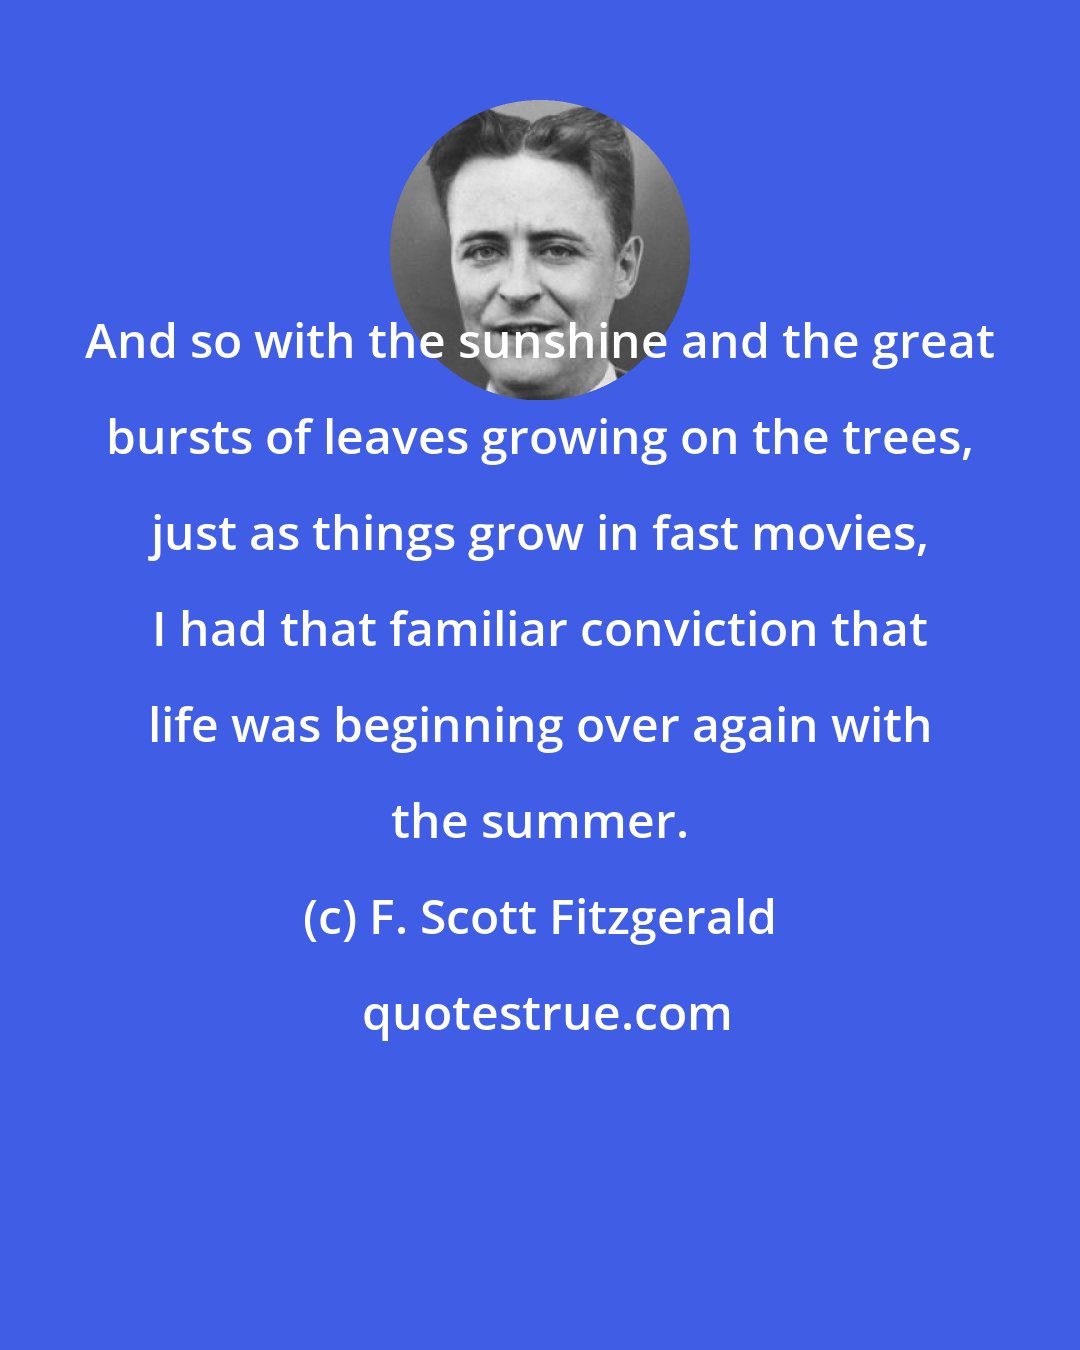 F. Scott Fitzgerald: And so with the sunshine and the great bursts of leaves growing on the trees, just as things grow in fast movies, I had that familiar conviction that life was beginning over again with the summer.